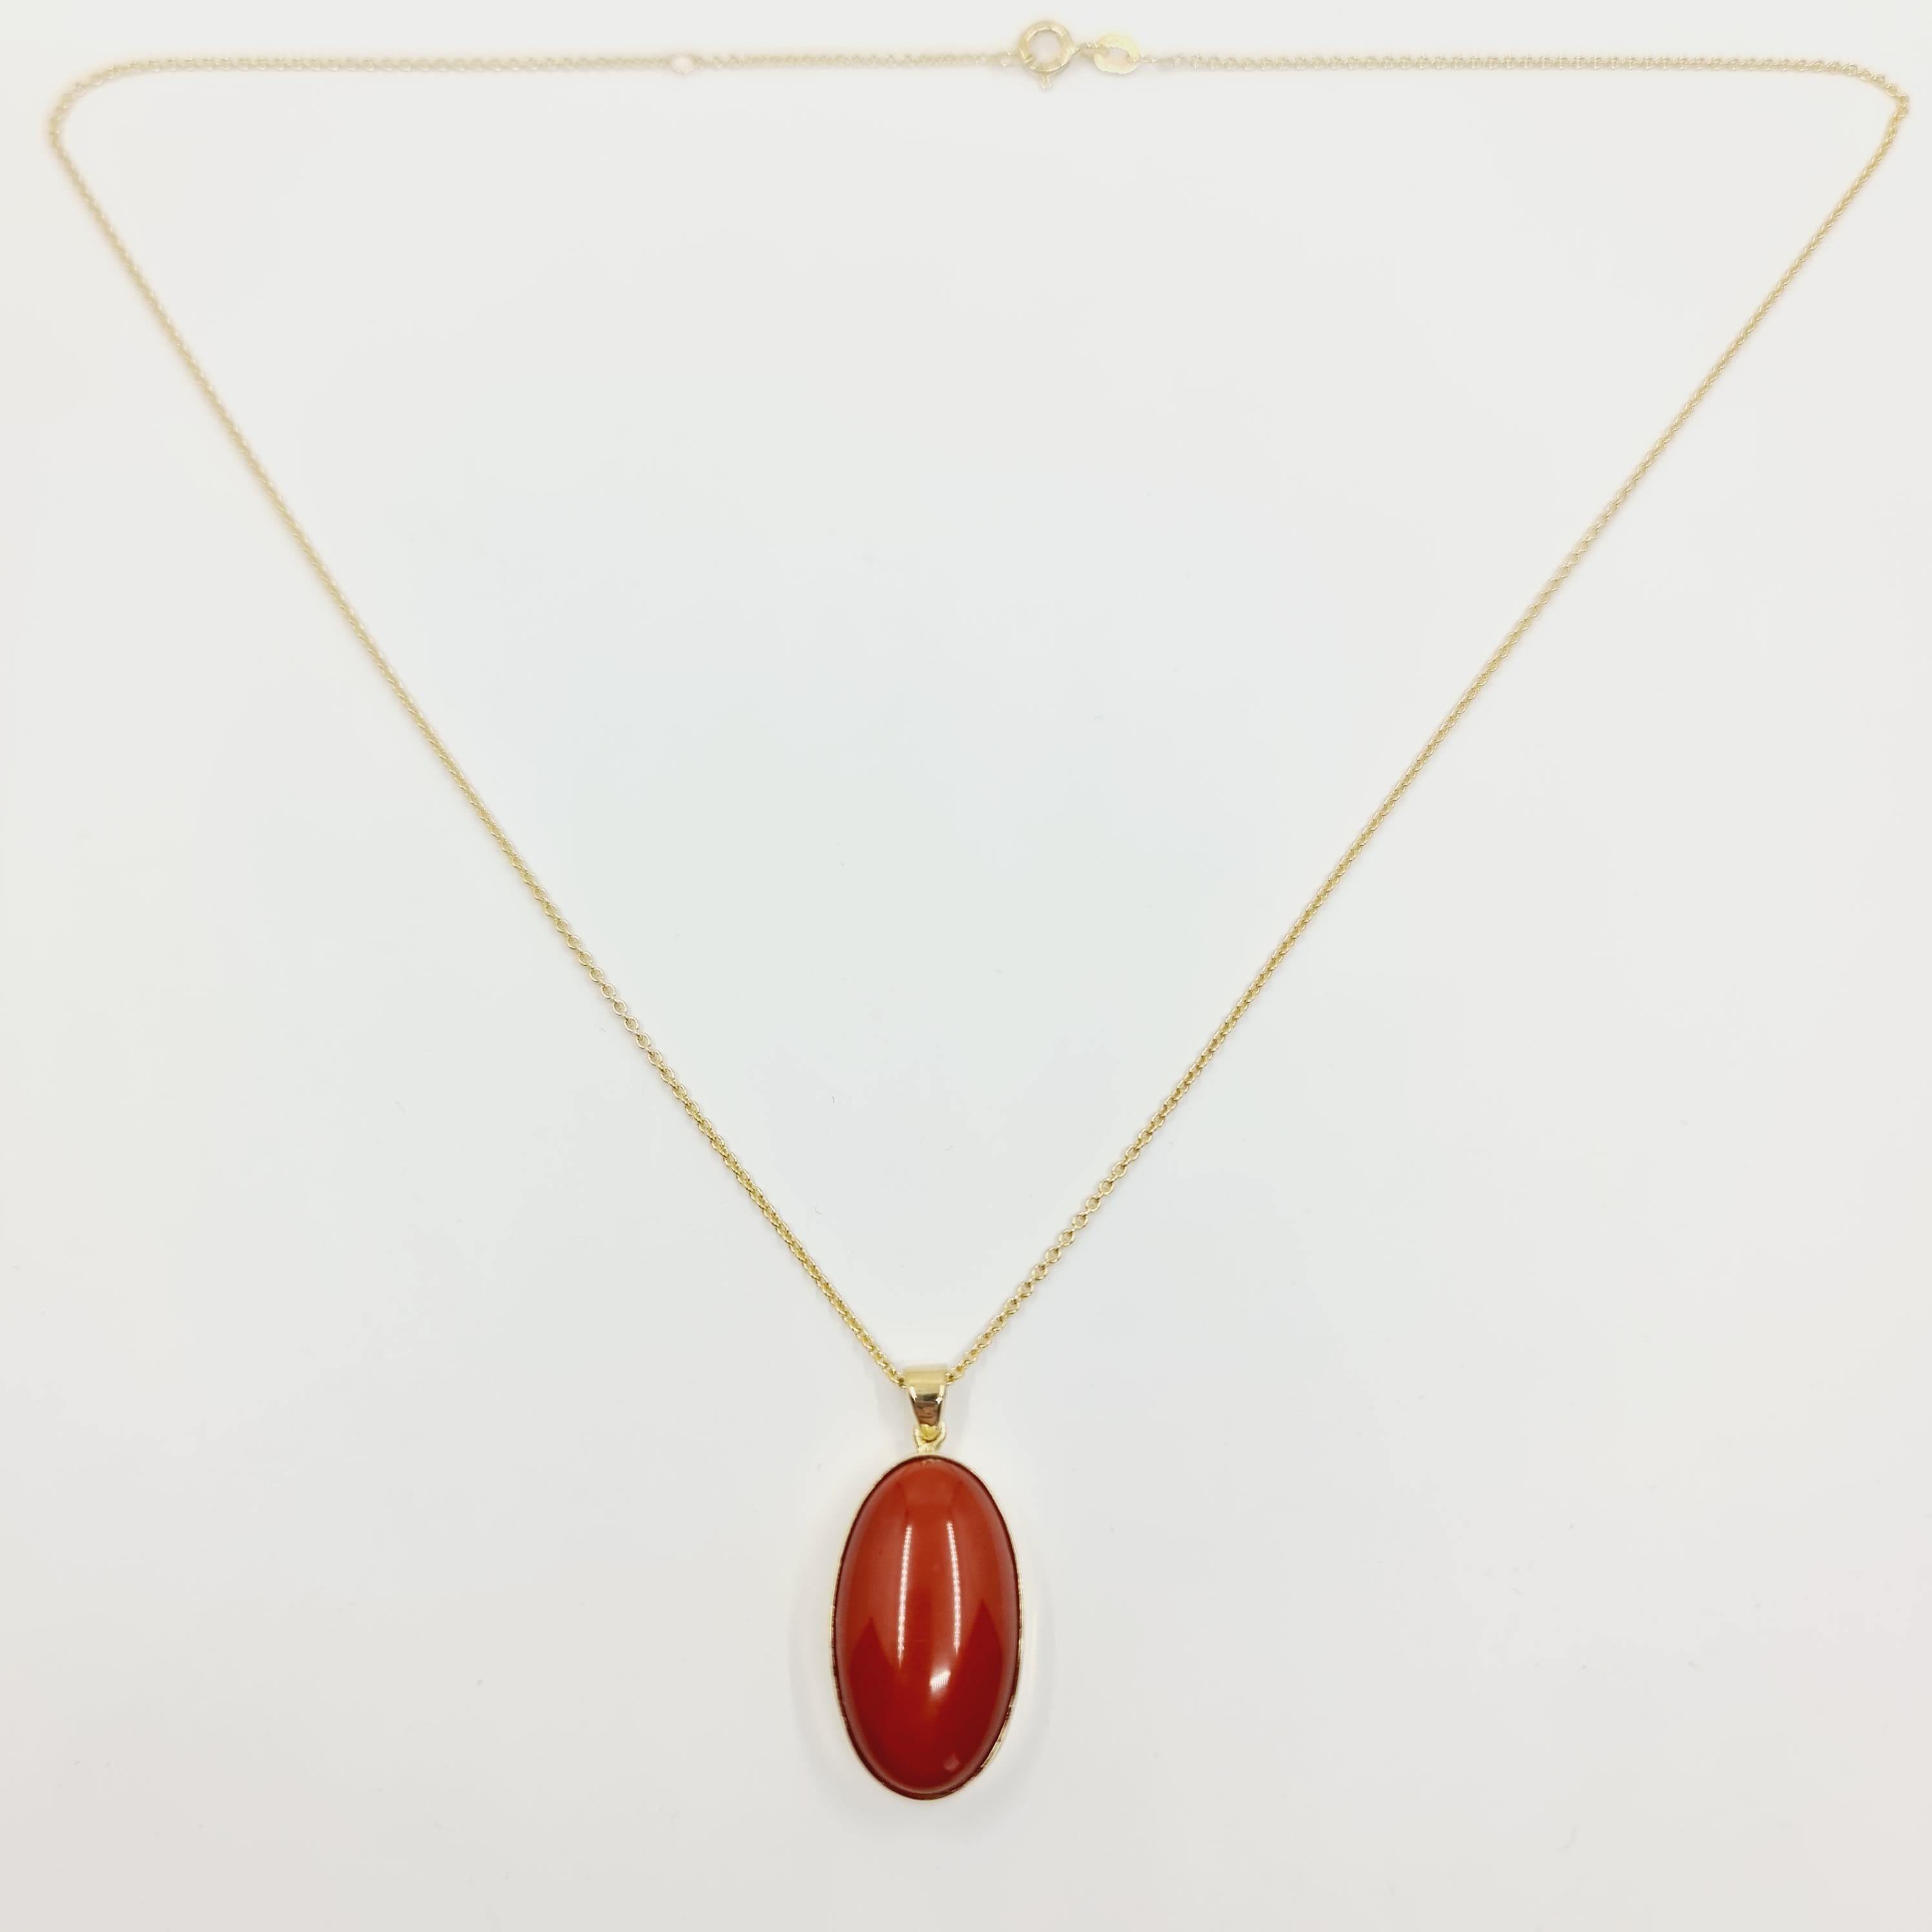 14k Gold Necklace with Oval Cut Natural Coral 13.3 Ct. For Sale 5